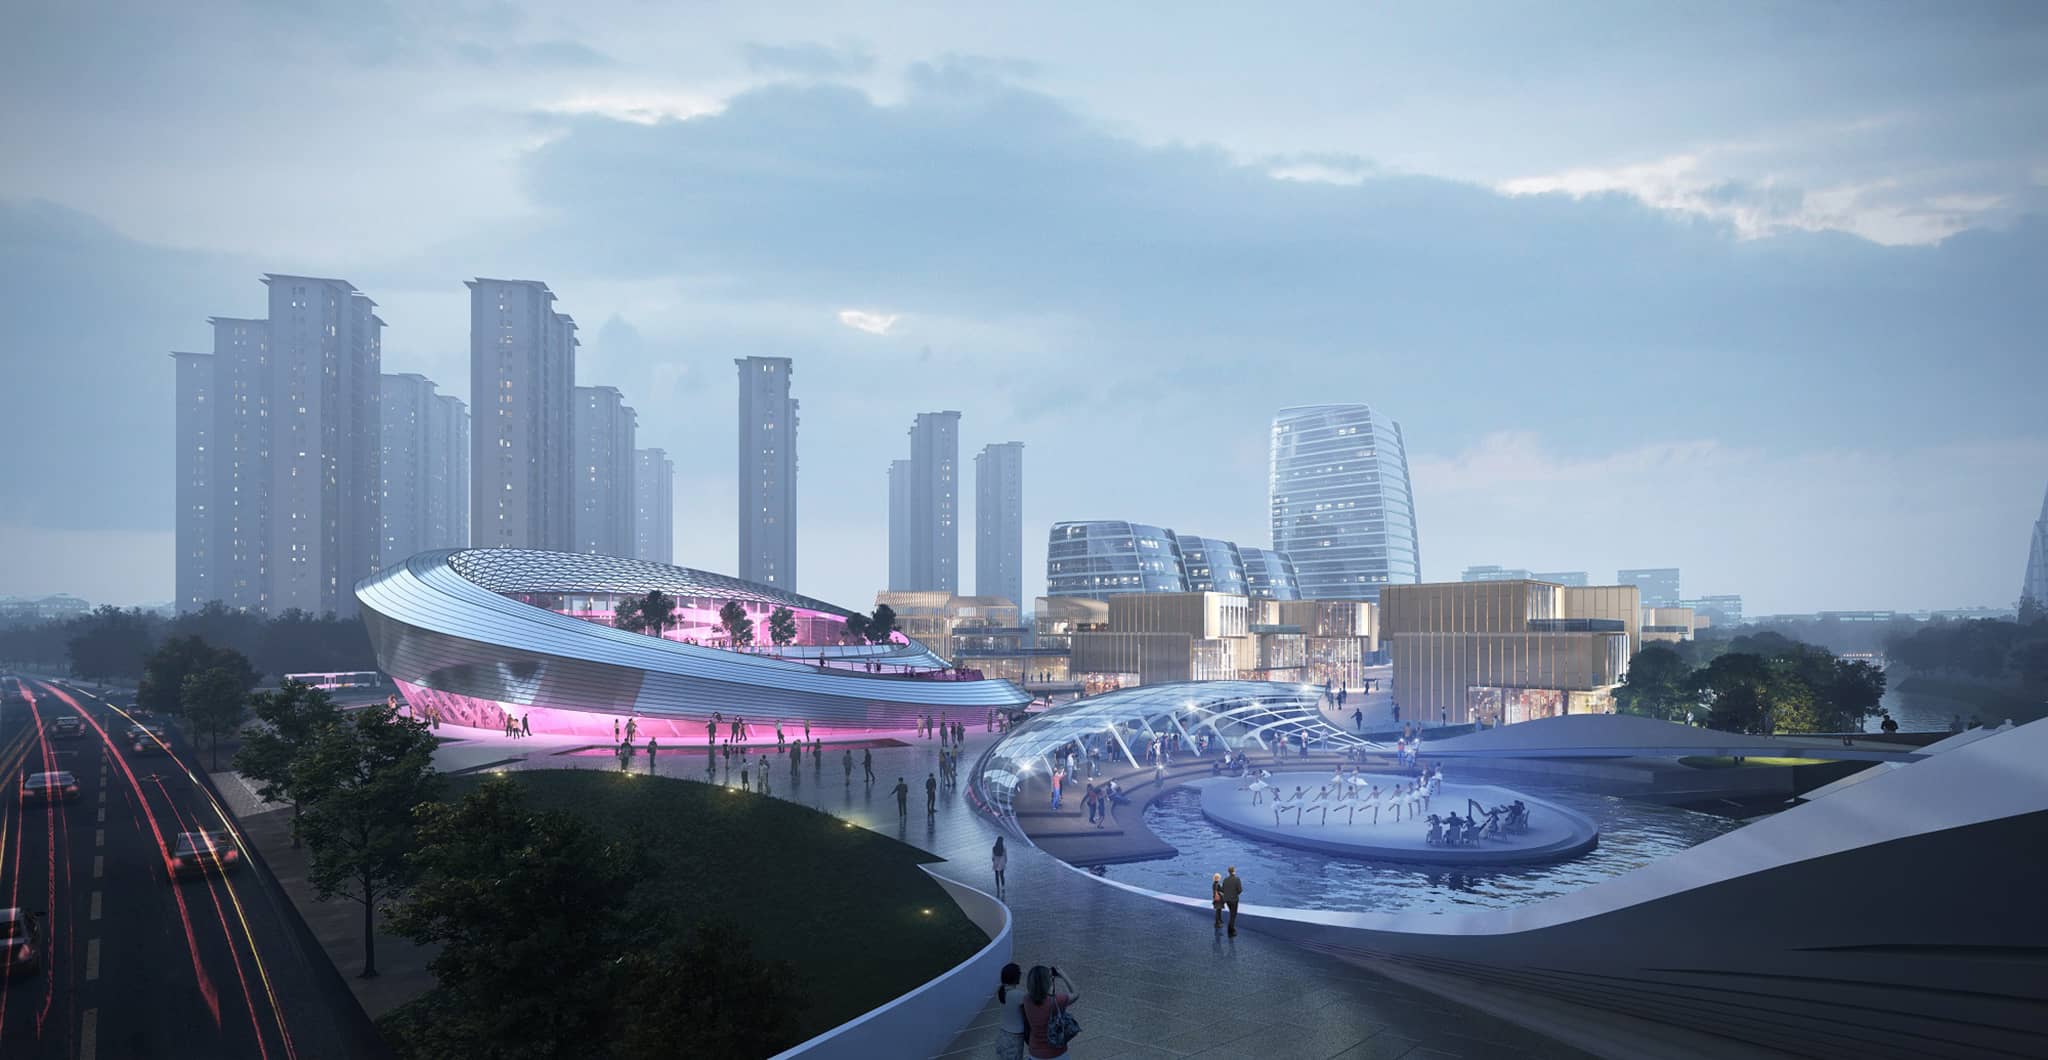 Exterior perspective rendering of an artistic and futuristic exhibition centre with led lighting; sunset mode aerial view.